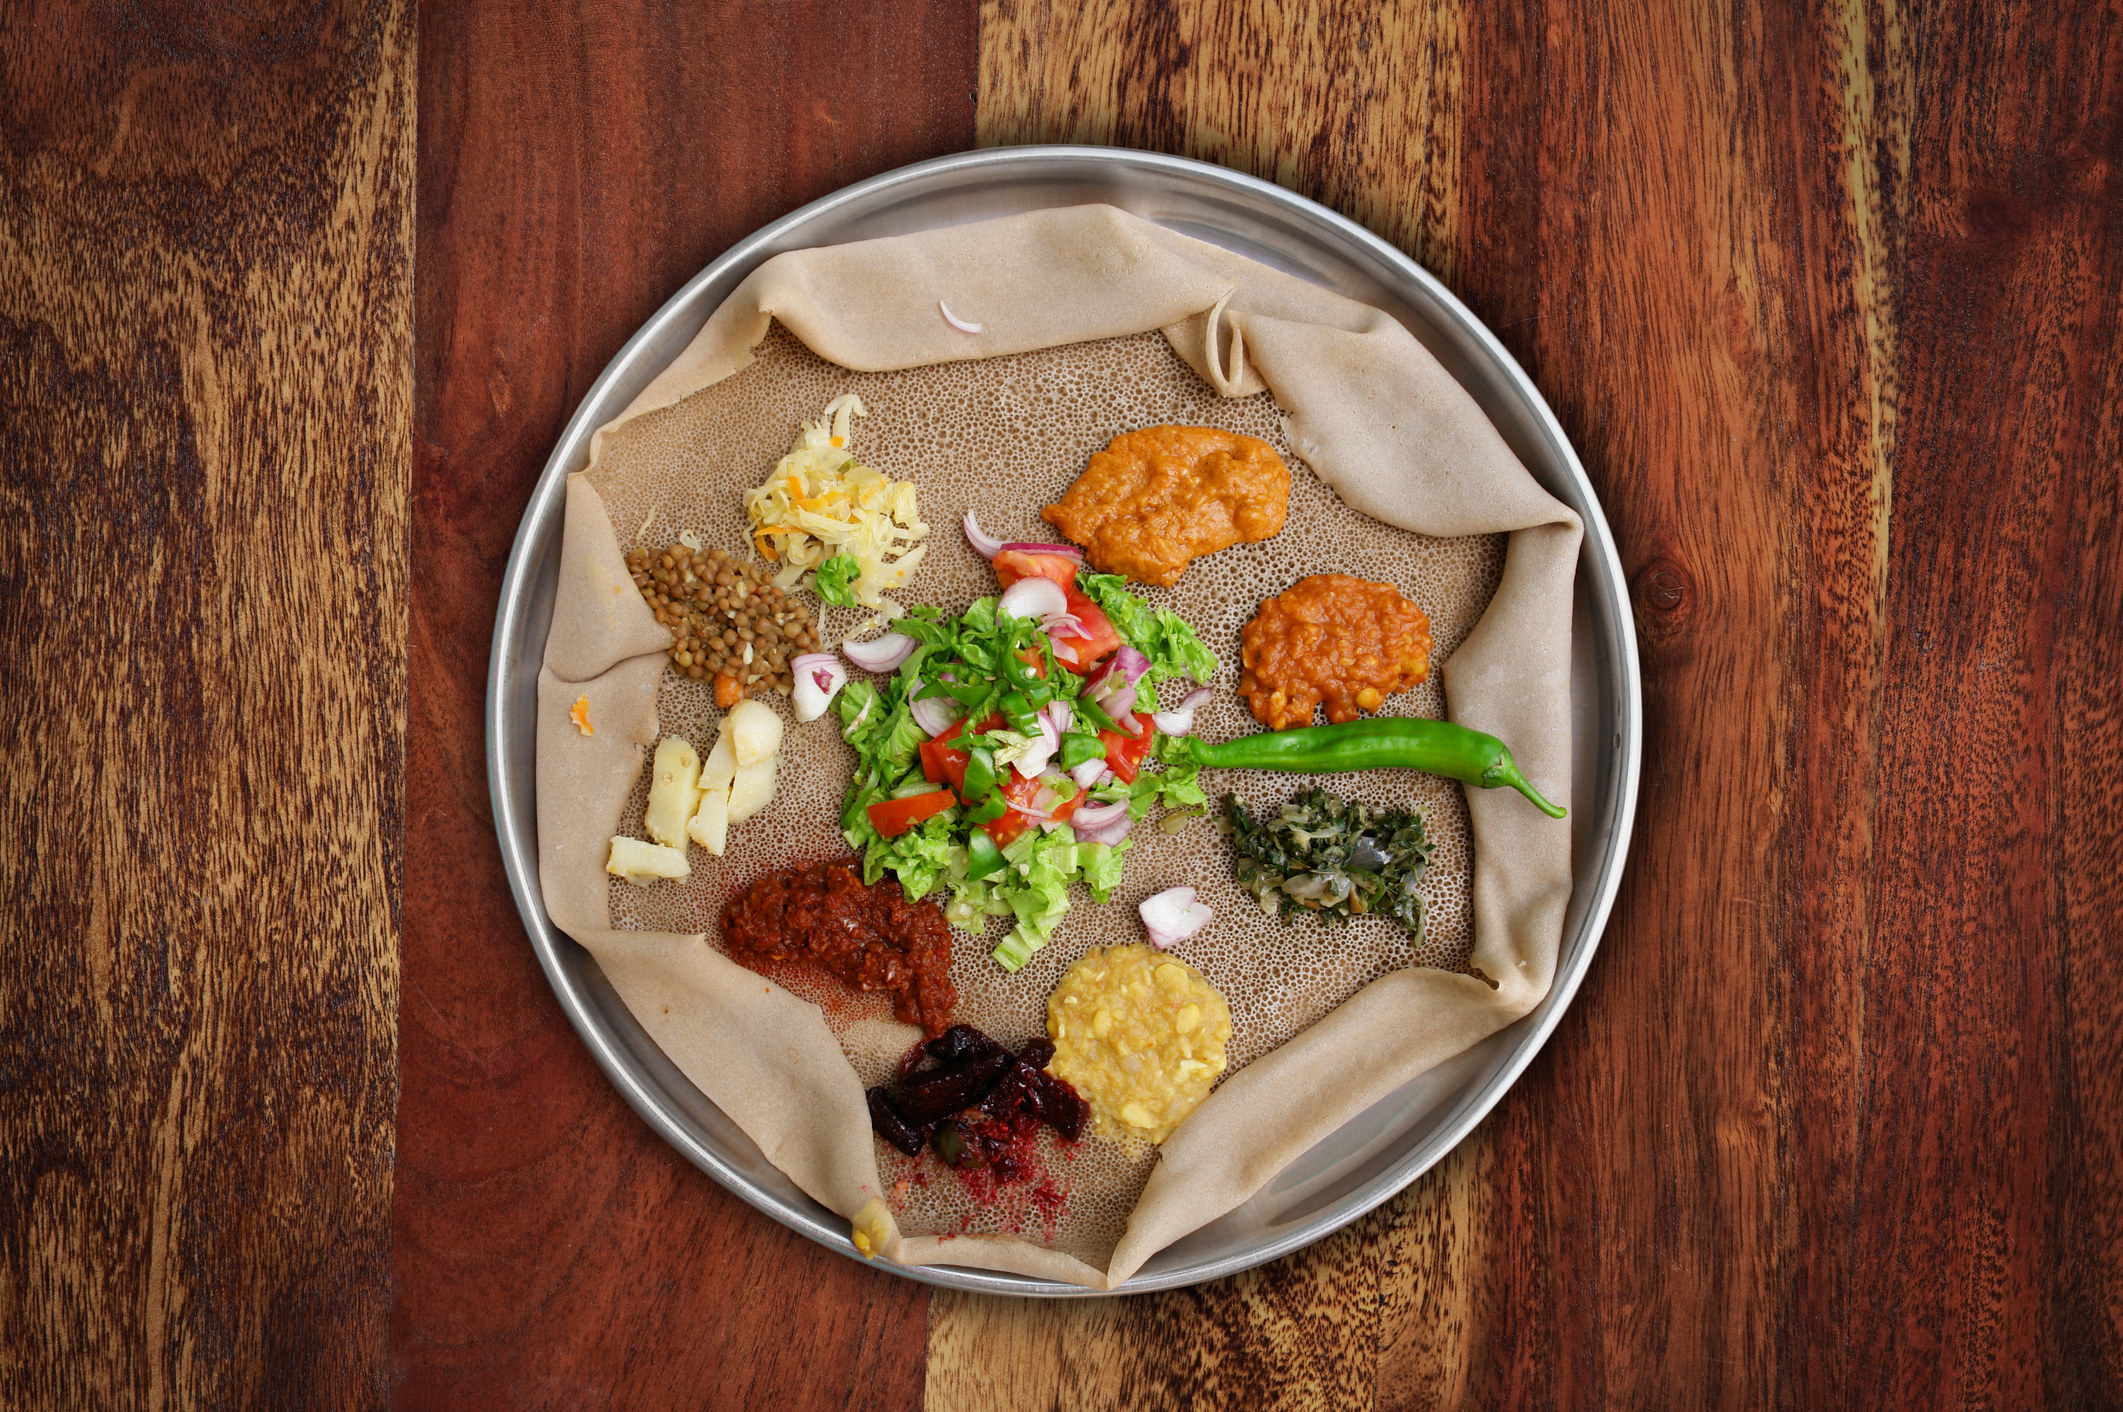 Injera, an Ethiopian flatbread, topped with different salads and condiments